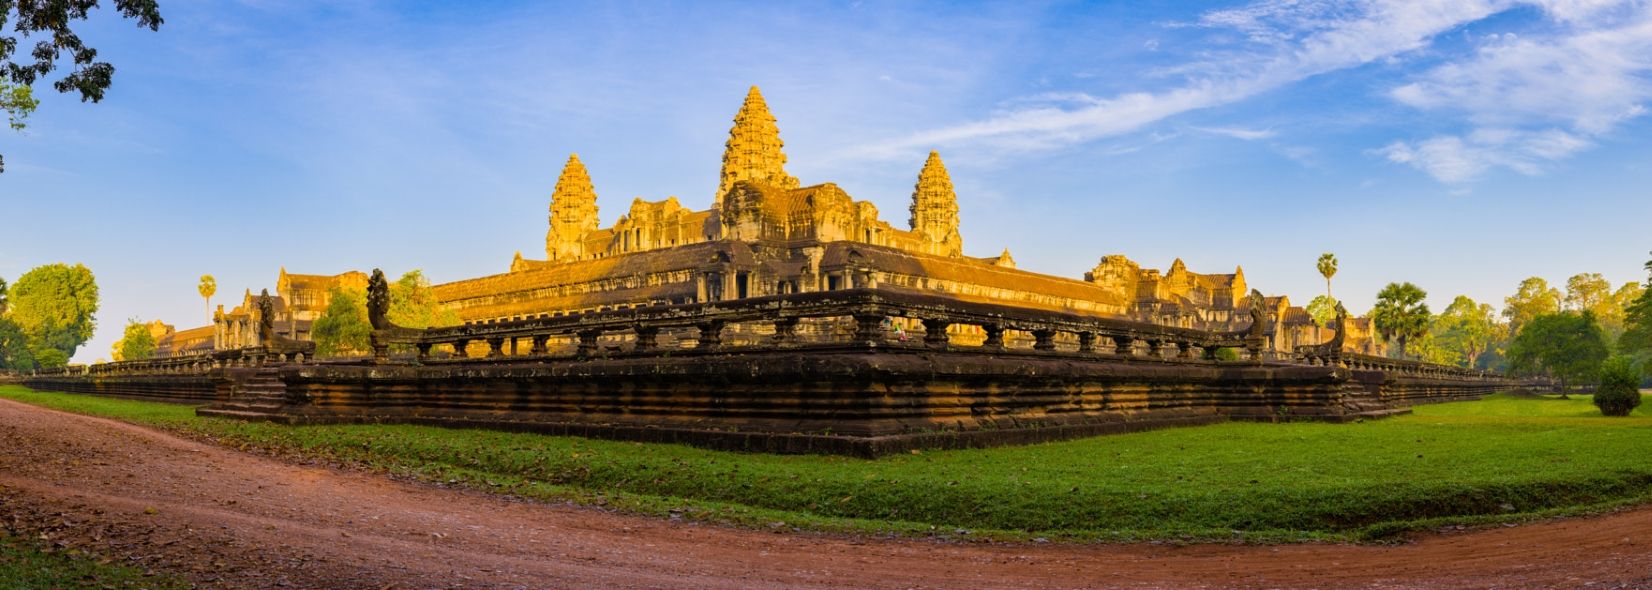 The Lost of Angkor